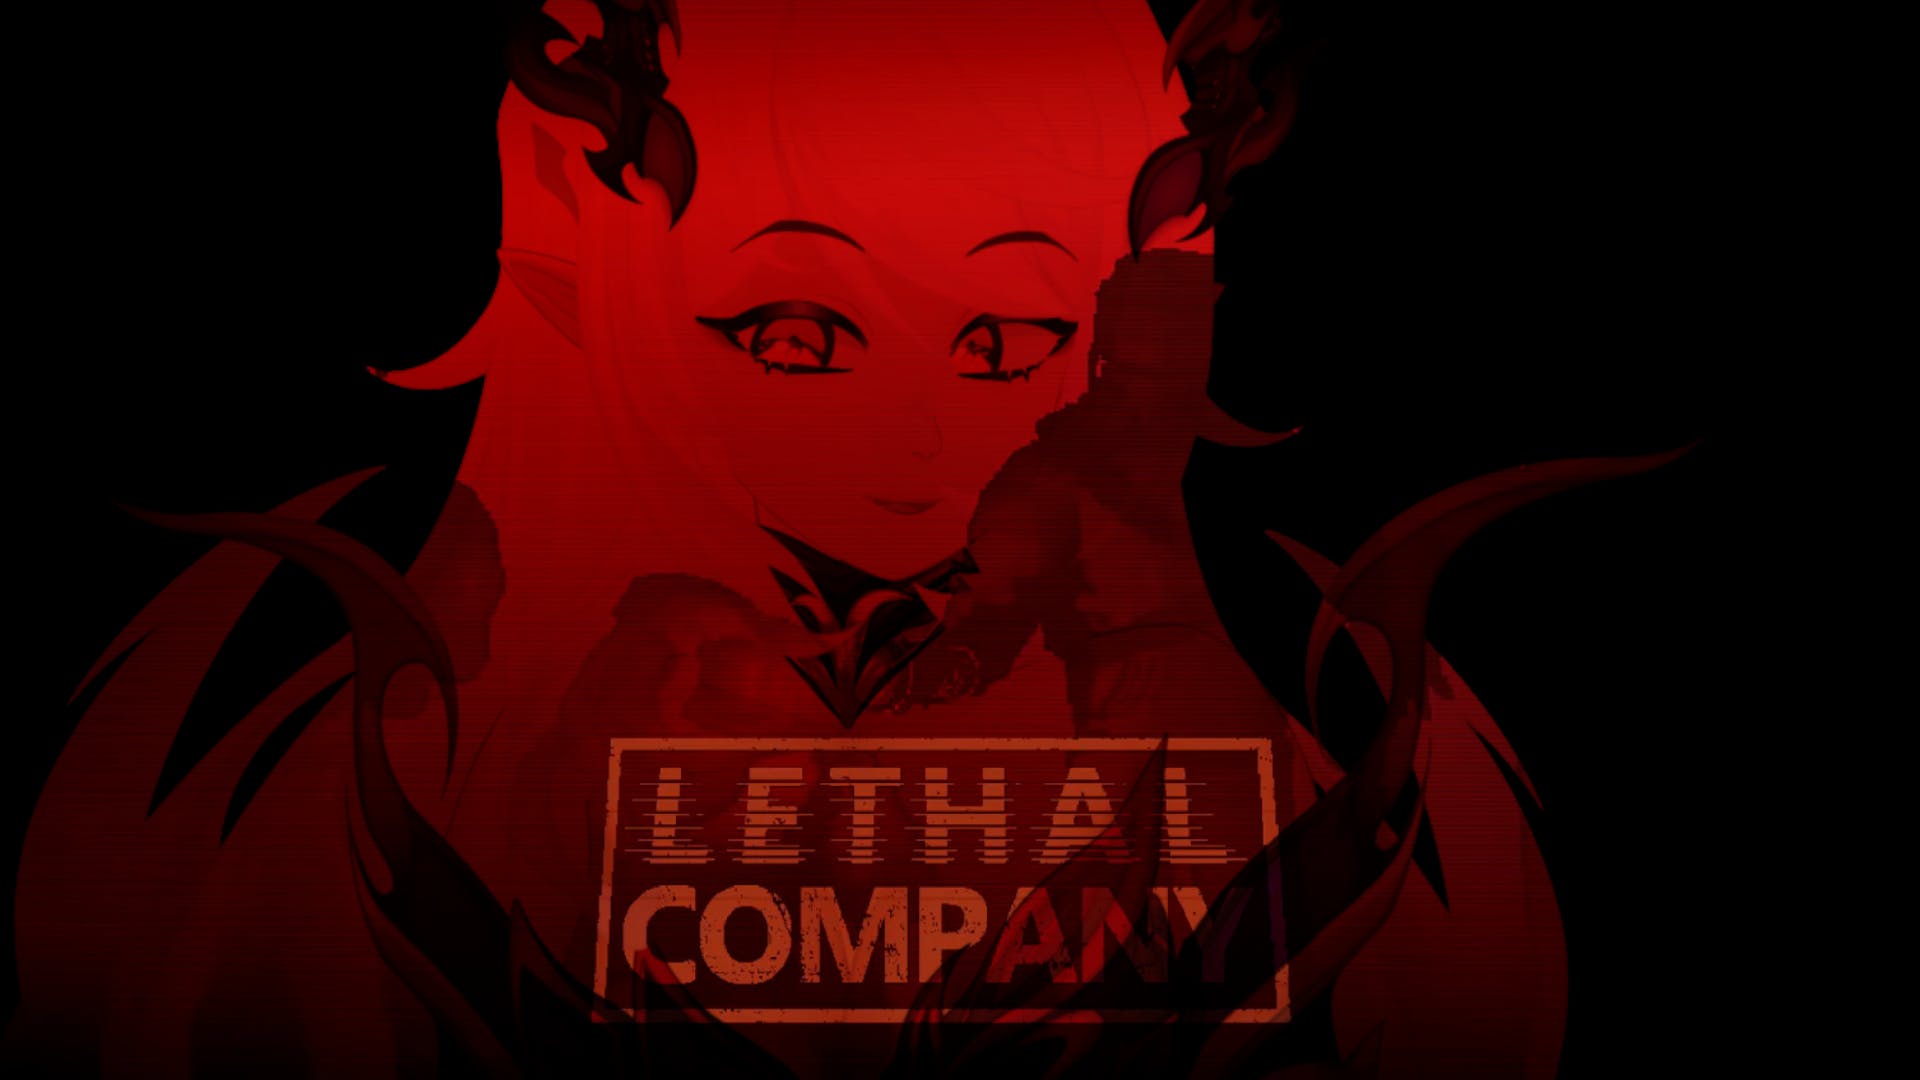 More Lethal, More Company